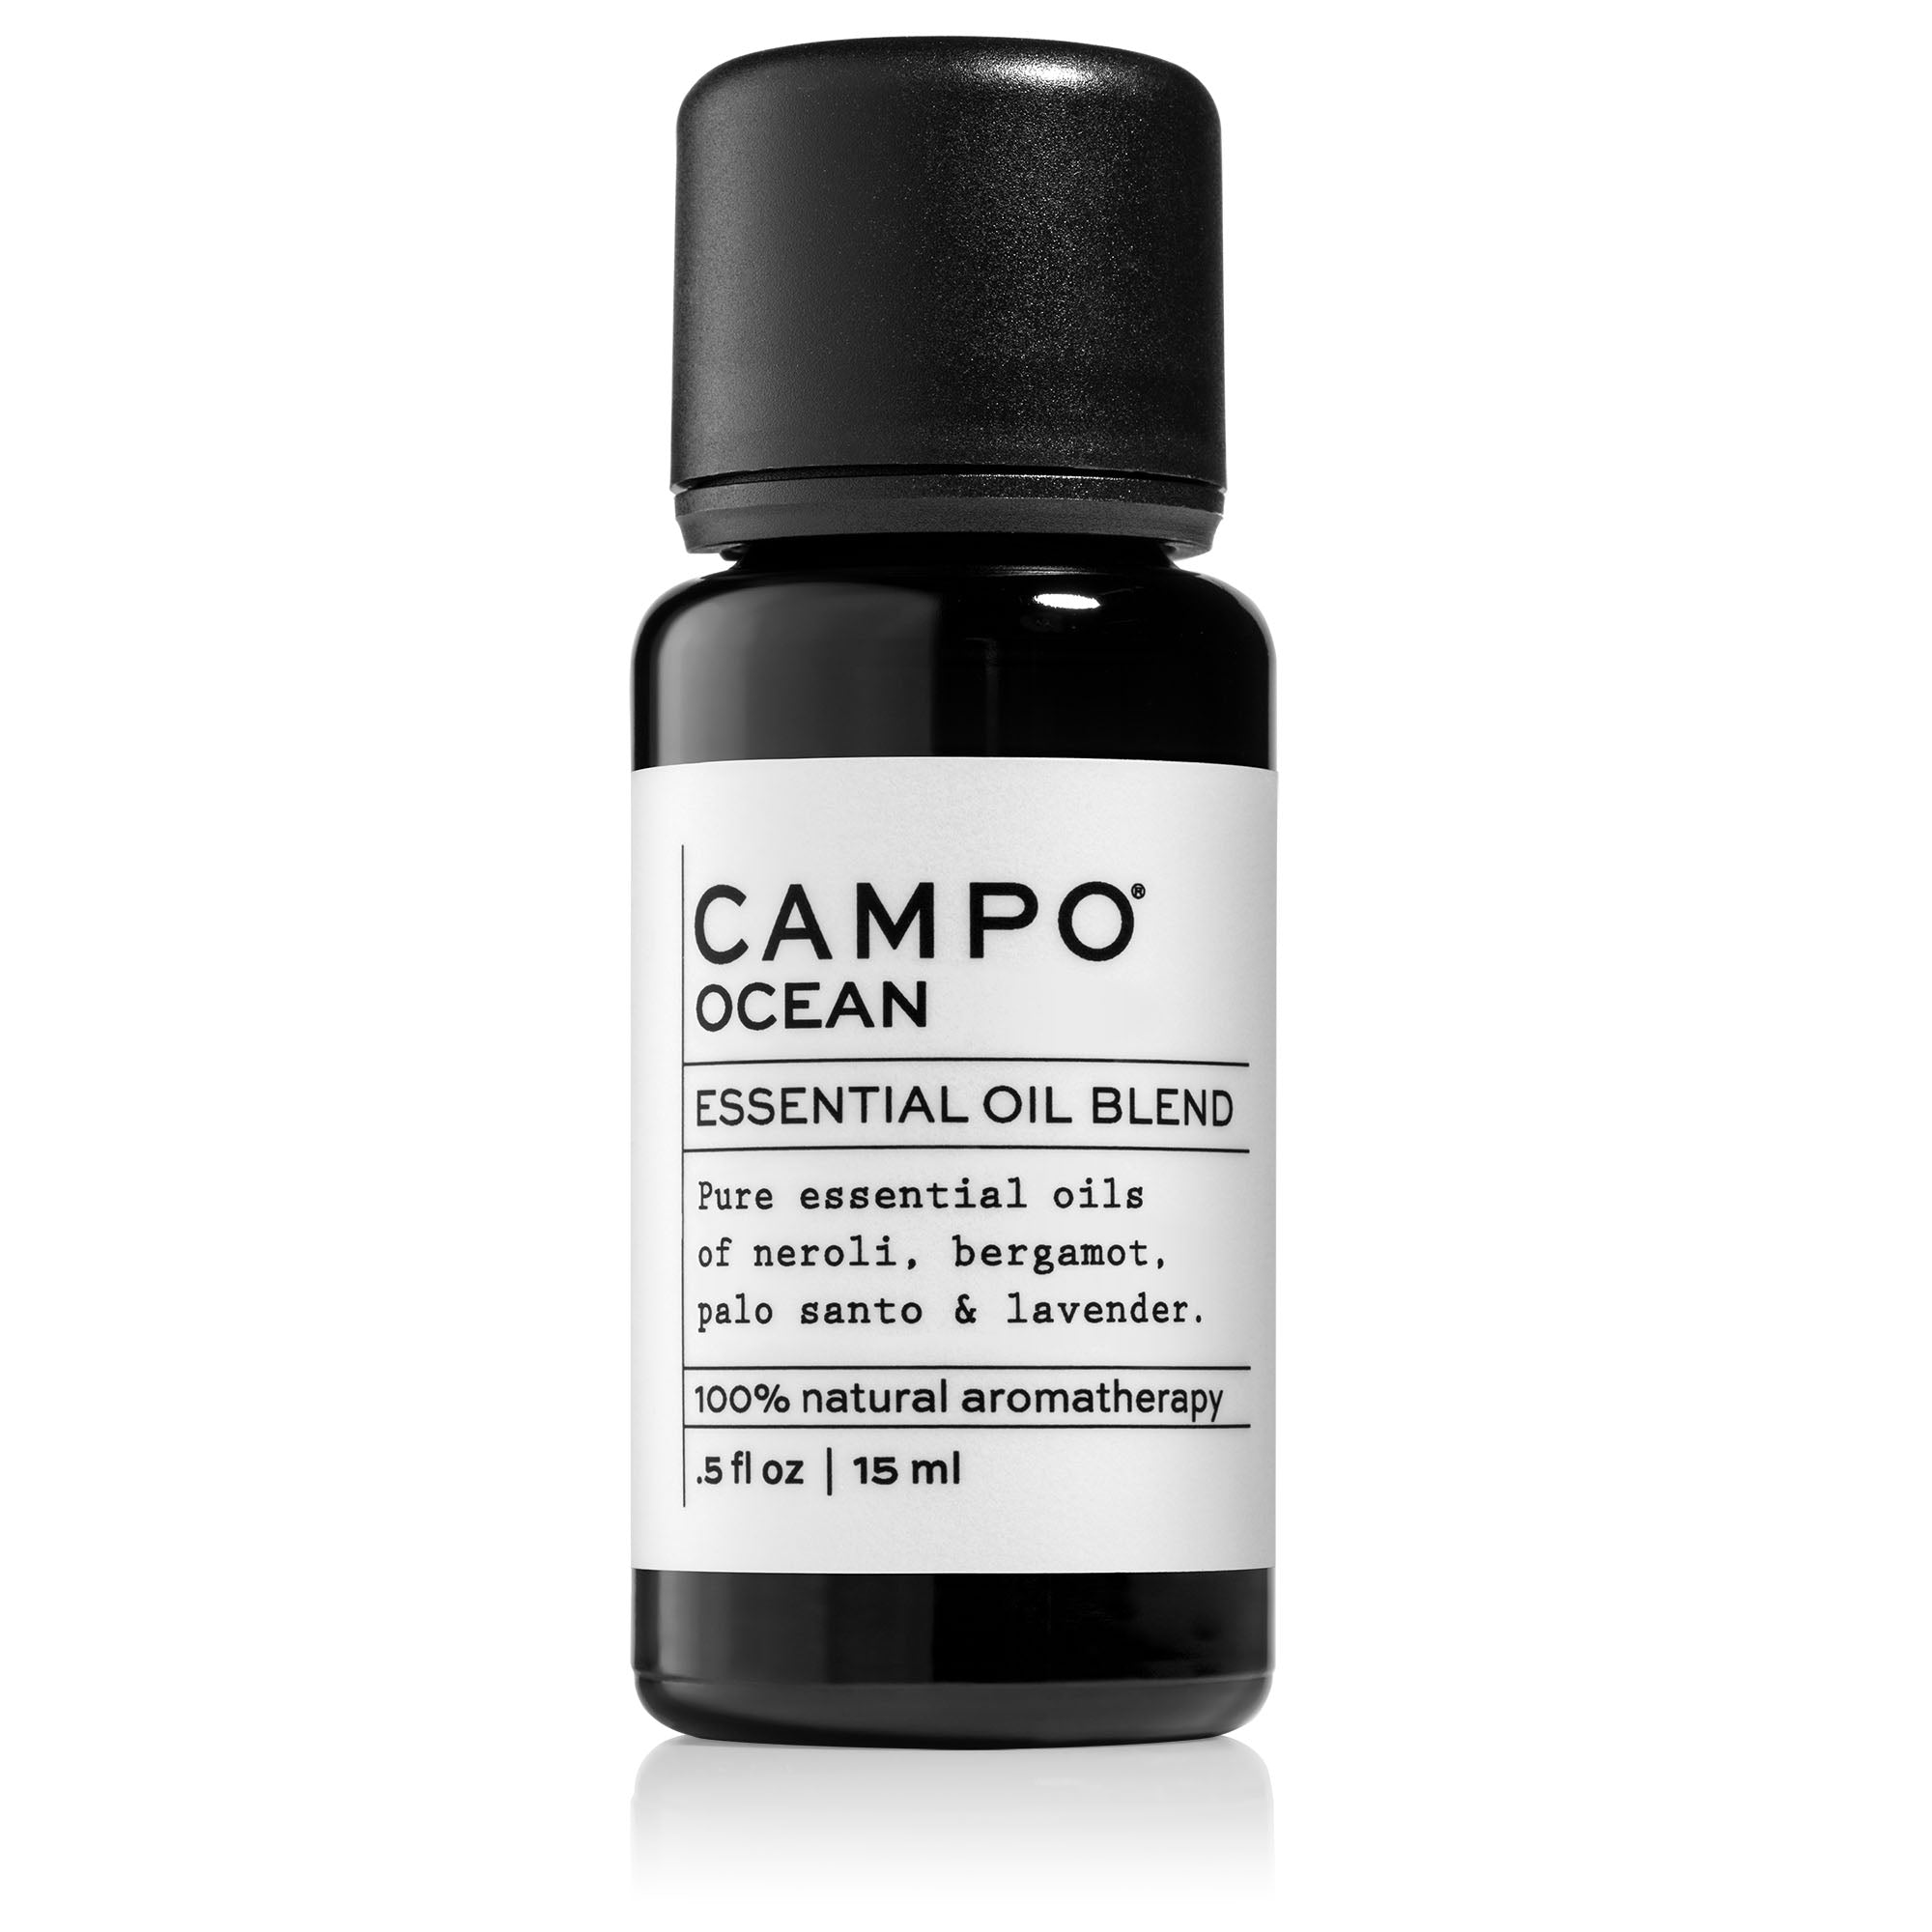 Campo Beauty OCEAN Blend 15 ml Essential Oil. Escape to the ocean with this 100% pure essential oil blend of neroli, palo santo, lavender and bergamot.